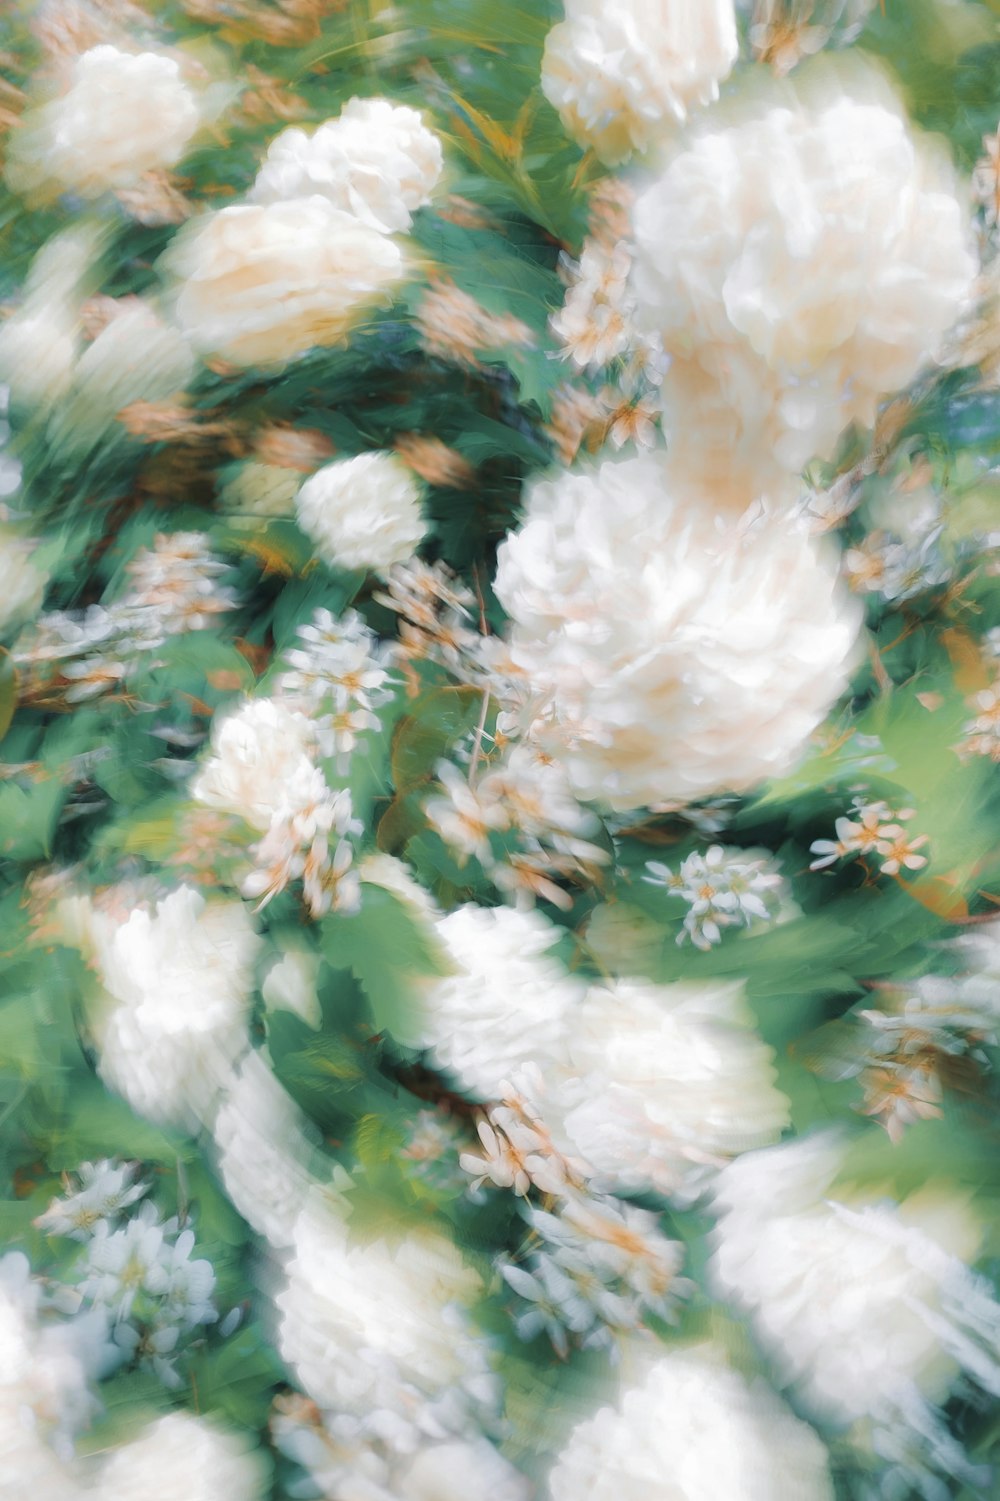 blurry photograph of white flowers in a garden